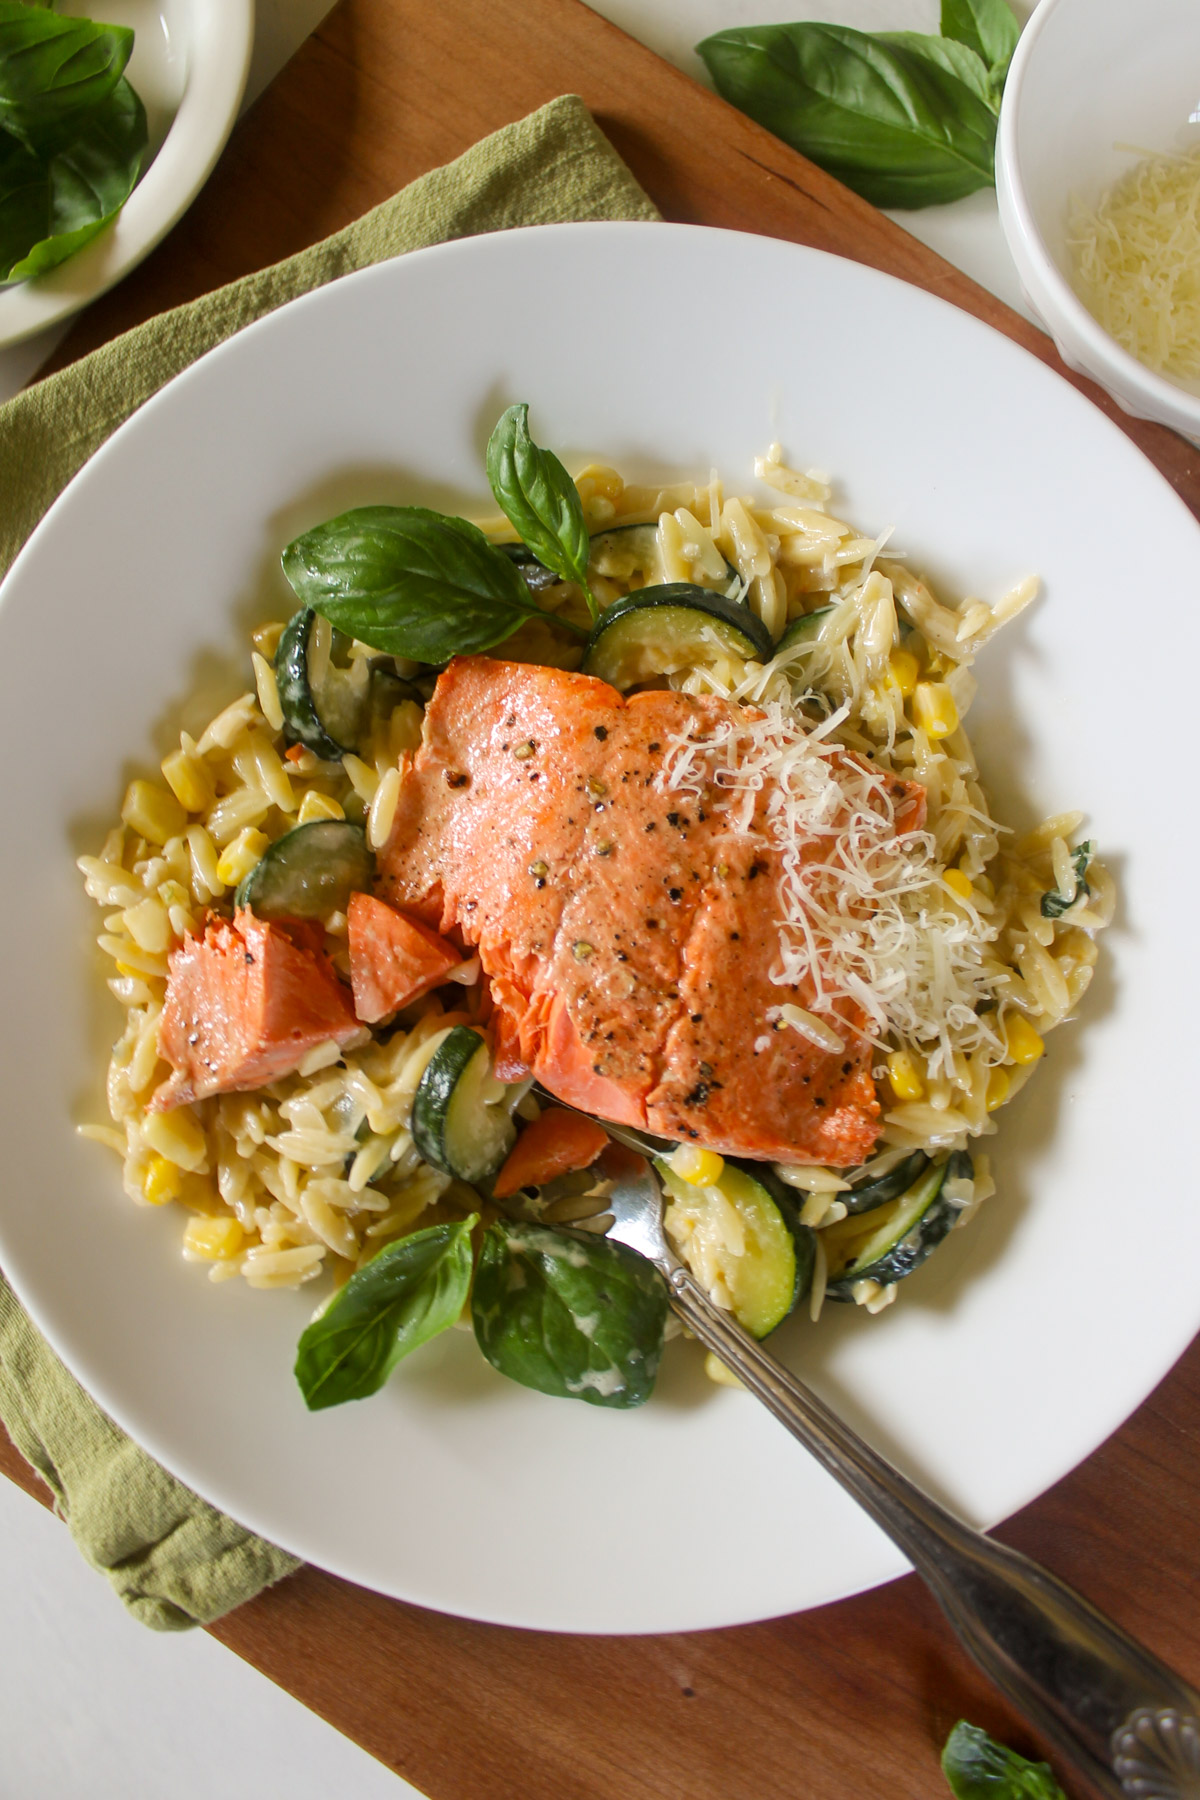 A plate of salmon on top of creamy orzo with corn, zucchini and basil leaves.